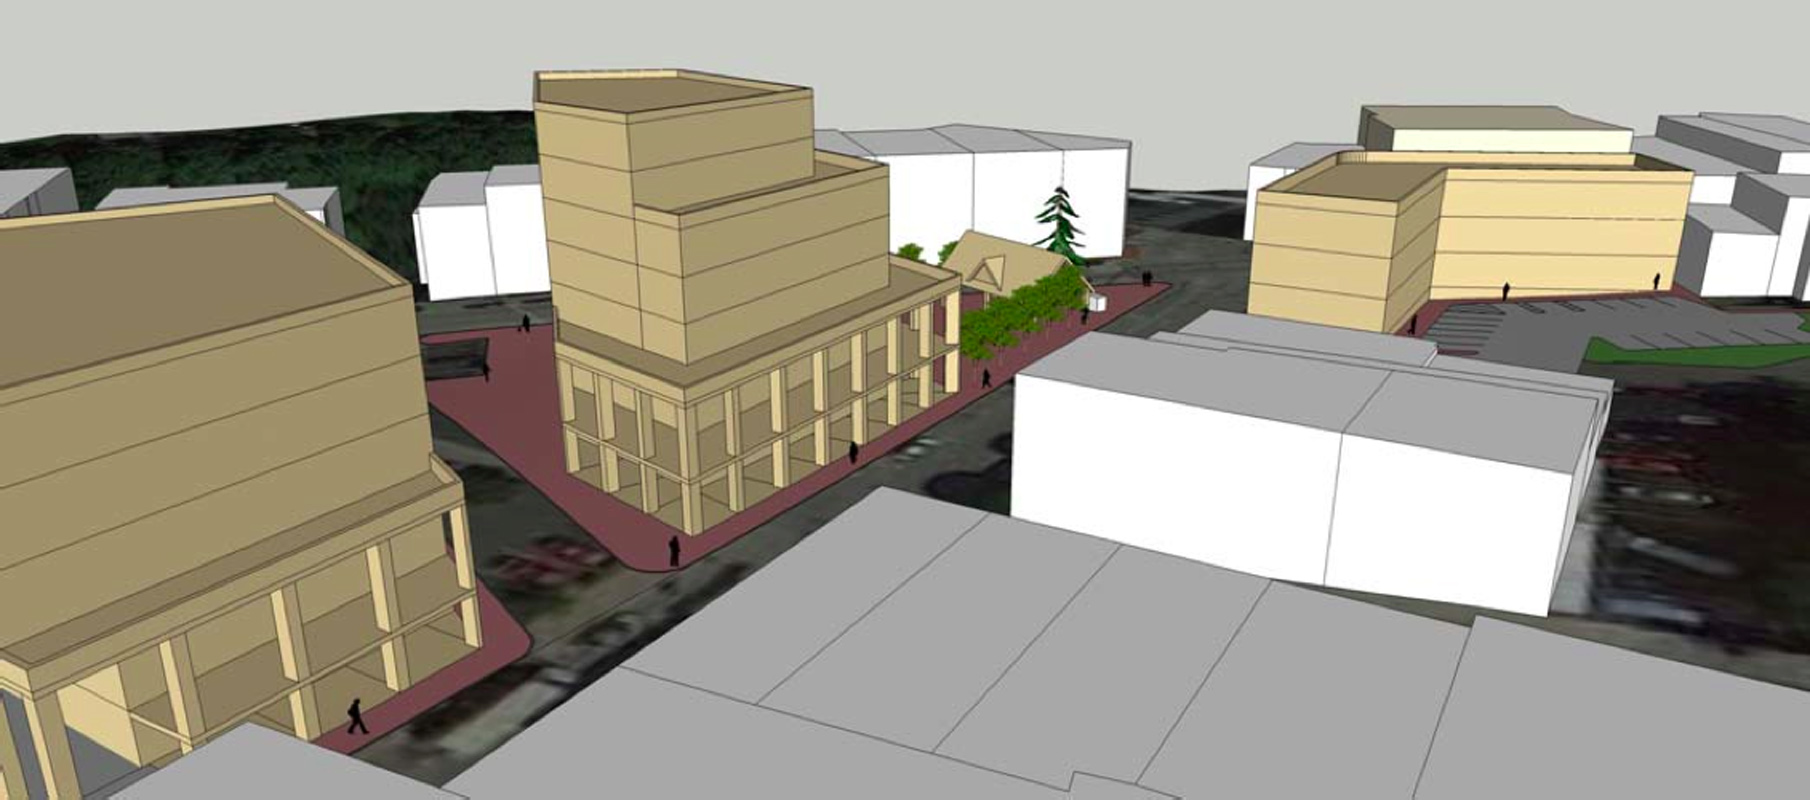 A downtown design view of DRG’s second proposed development scenario for the Village of Ossining’s Market Square and parking lots at the intersection of Main and Spring Streets